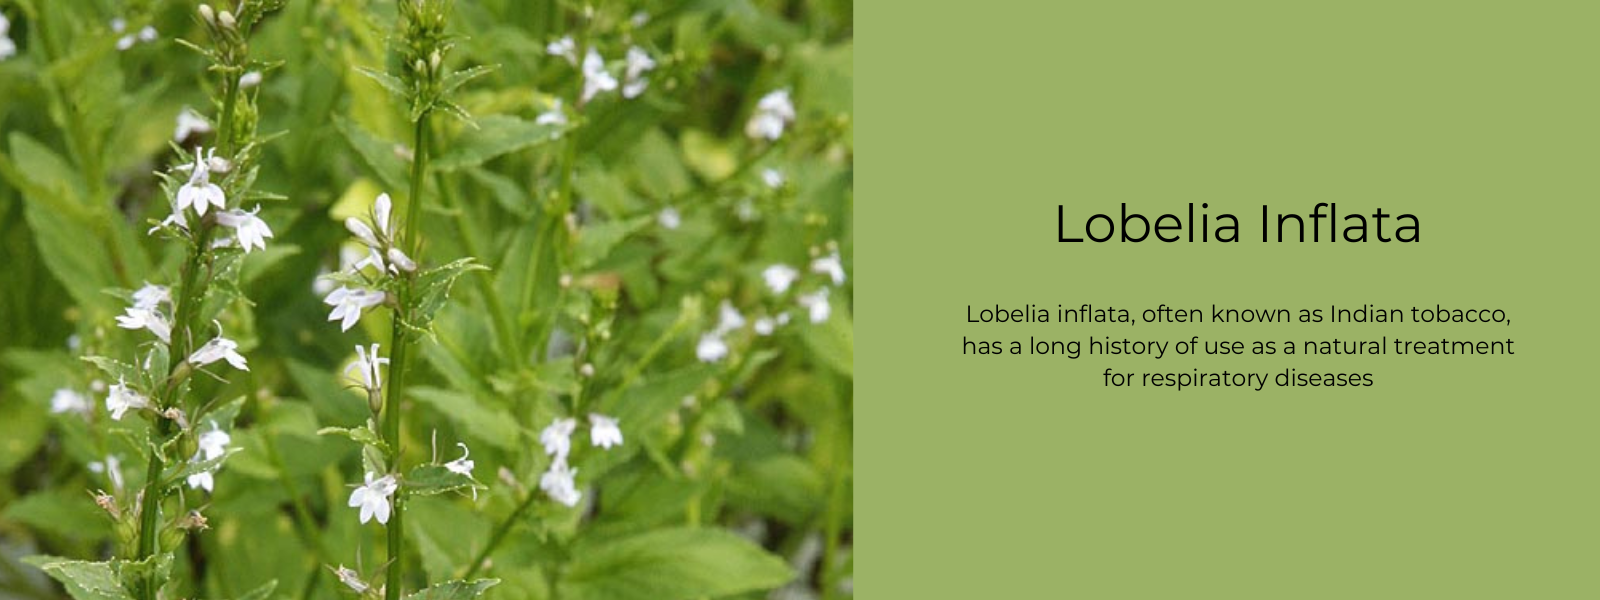 Lobelia Inflata - Health Benefits, Uses and Important Facts